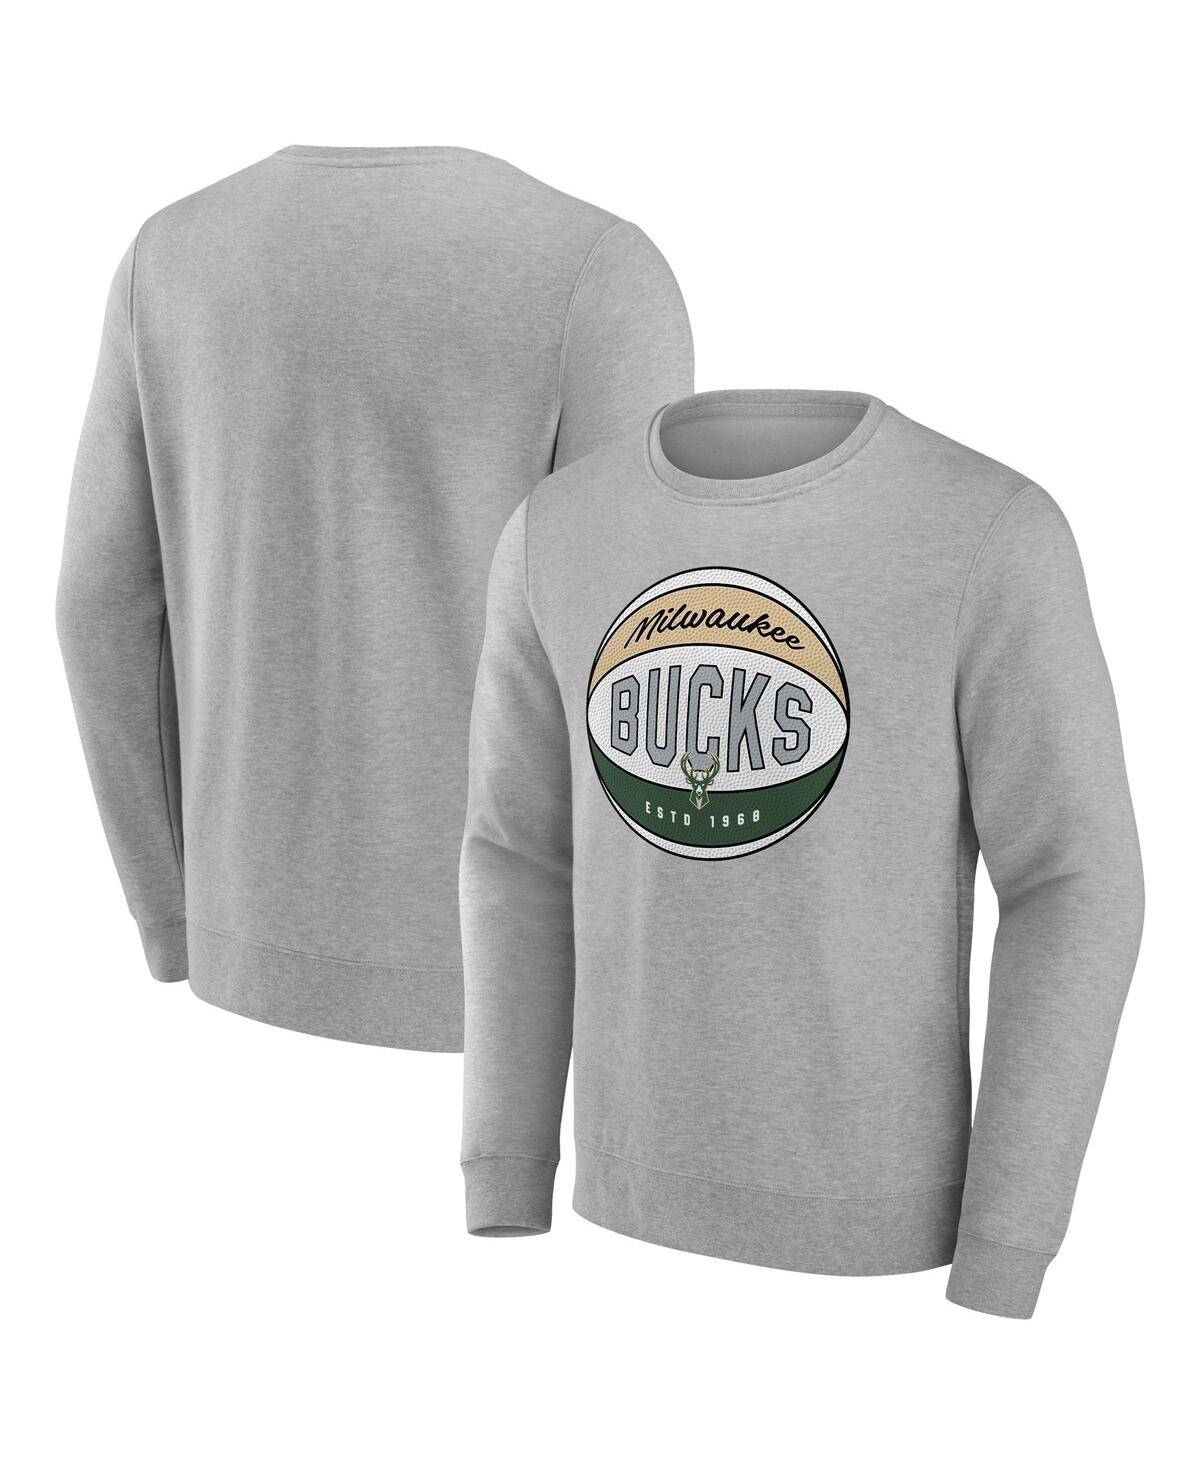 Fanatics Branded Men's Heathered Gray Los Angeles Lakers Team Primary Logo Pullover Hoodie - Heather Gray